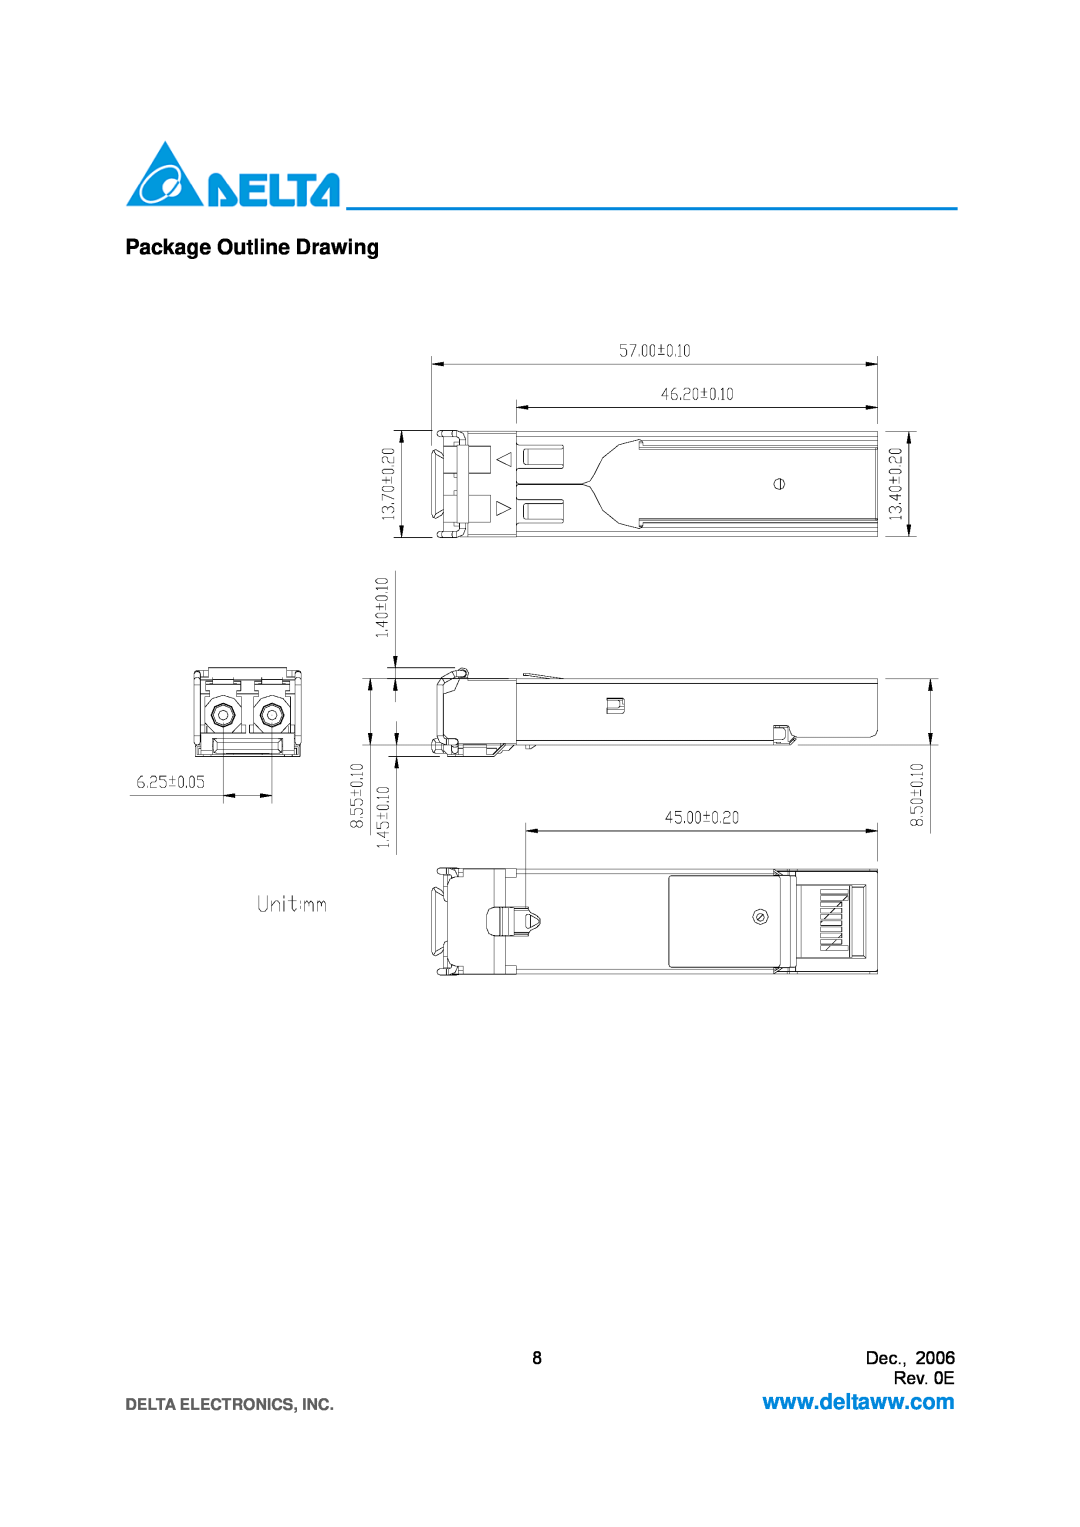 Delta Electronics STM-16, OC-48/SDH manual Package Outline Drawing, Rev. 0E, Delta Electronics, Inc 